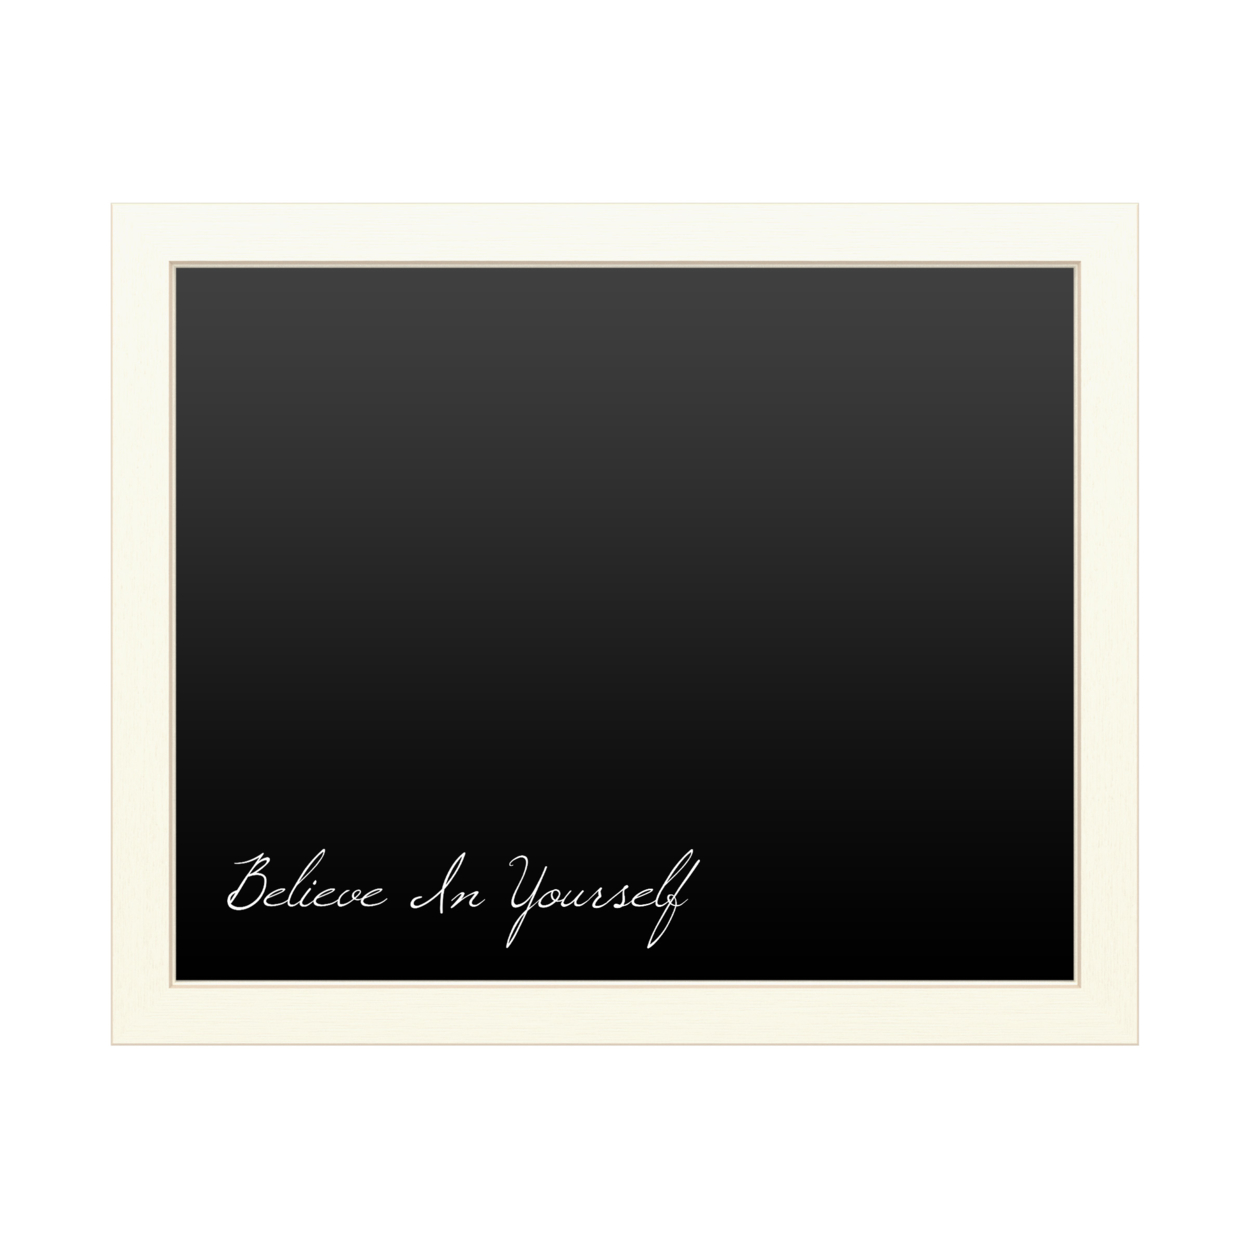 16 X 20 Chalk Board With Printed Artwork - Believe In Yourself White Board - Ready To Hang Chalkboard